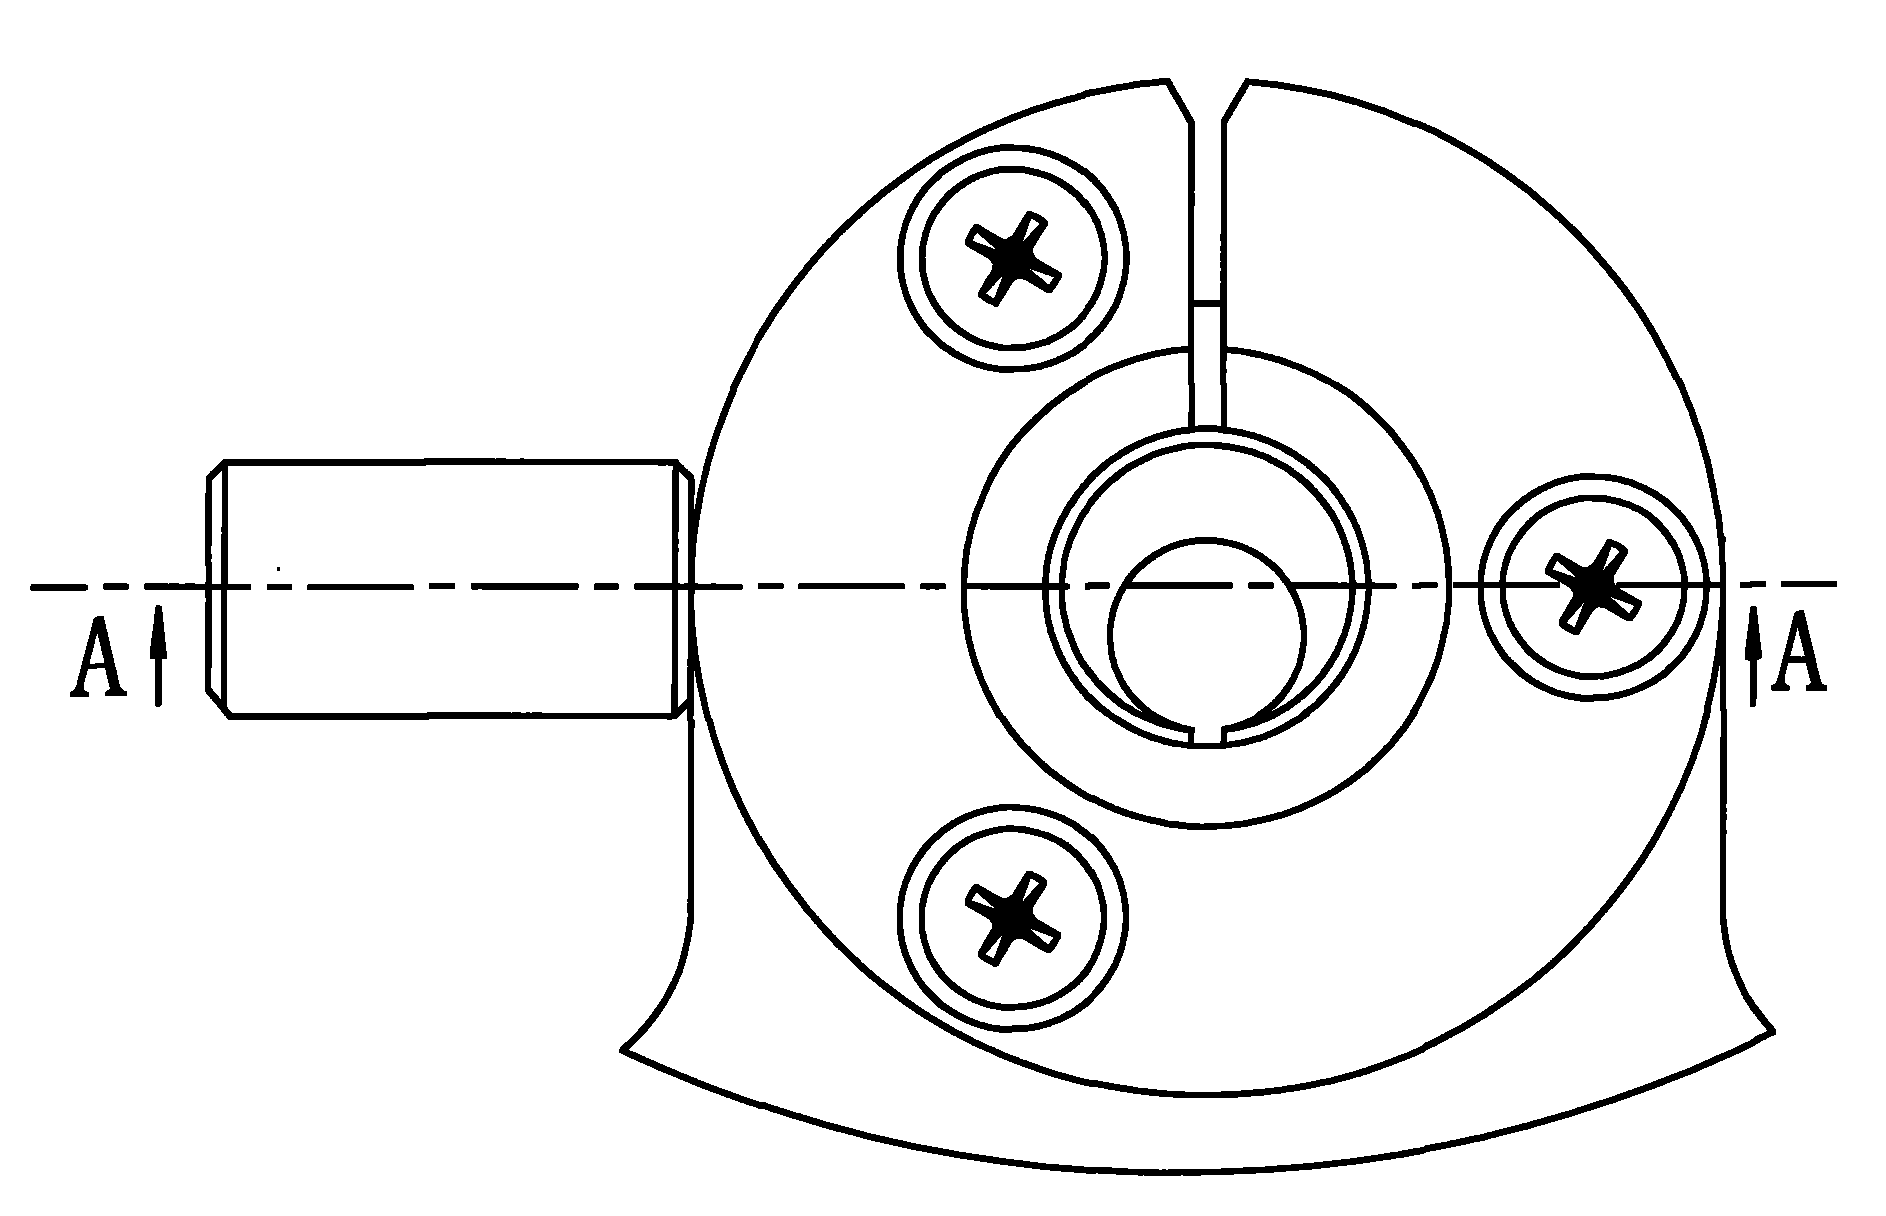 Nozzle device of linear cutting machine